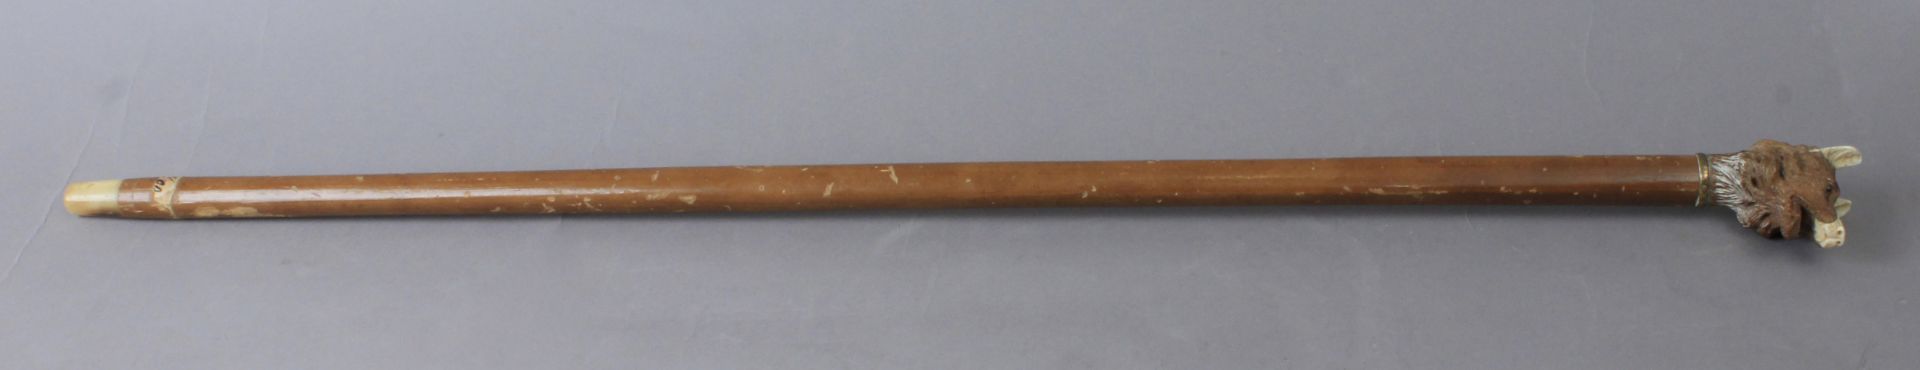 An early 20th century walking stick - Image 2 of 3